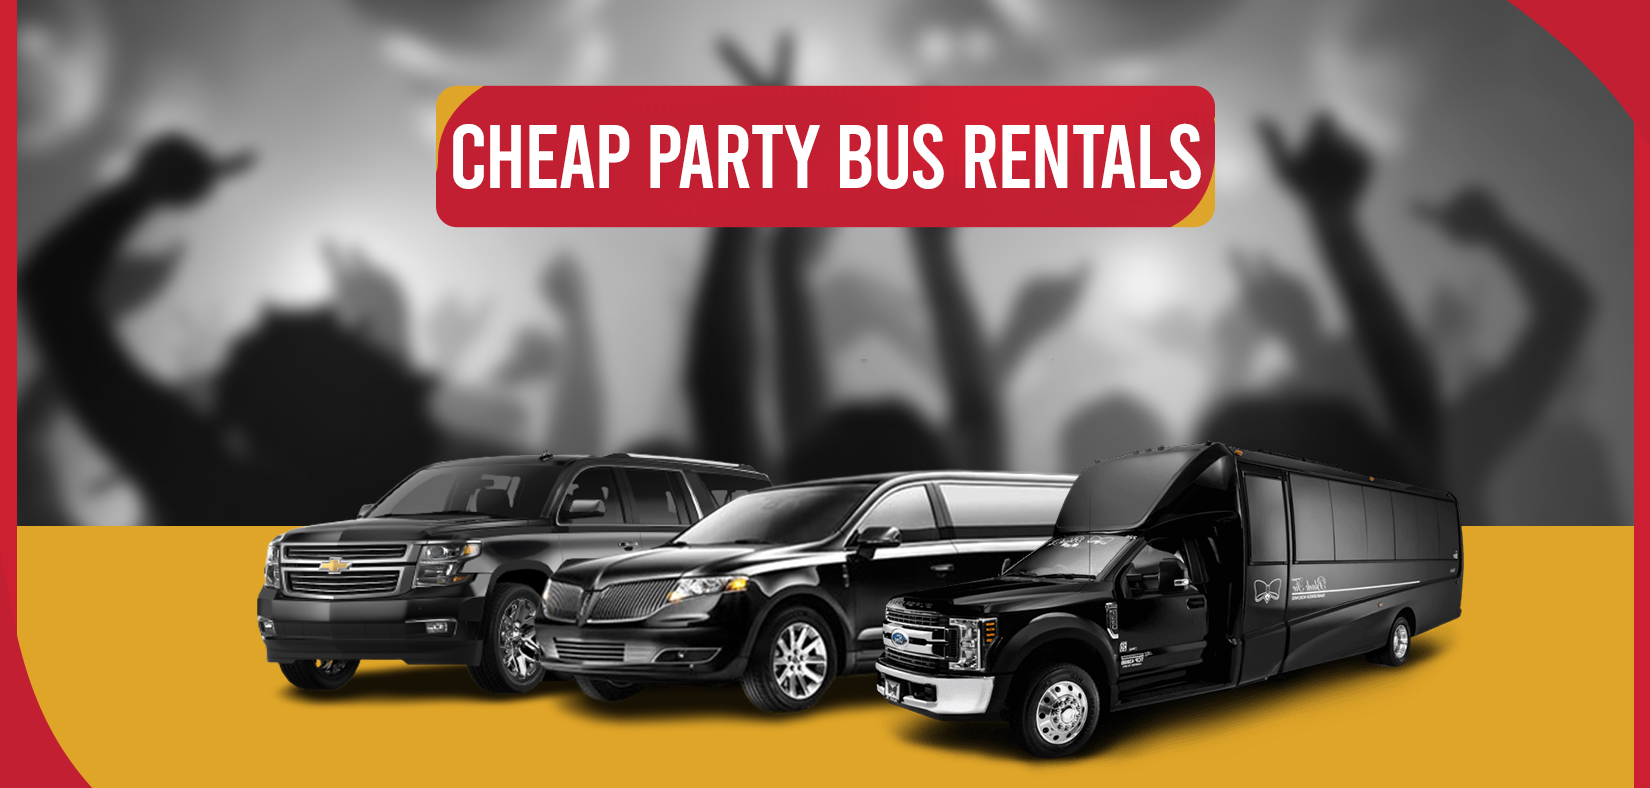 Cheap Party Bus Rentals In New York Tri-State Area